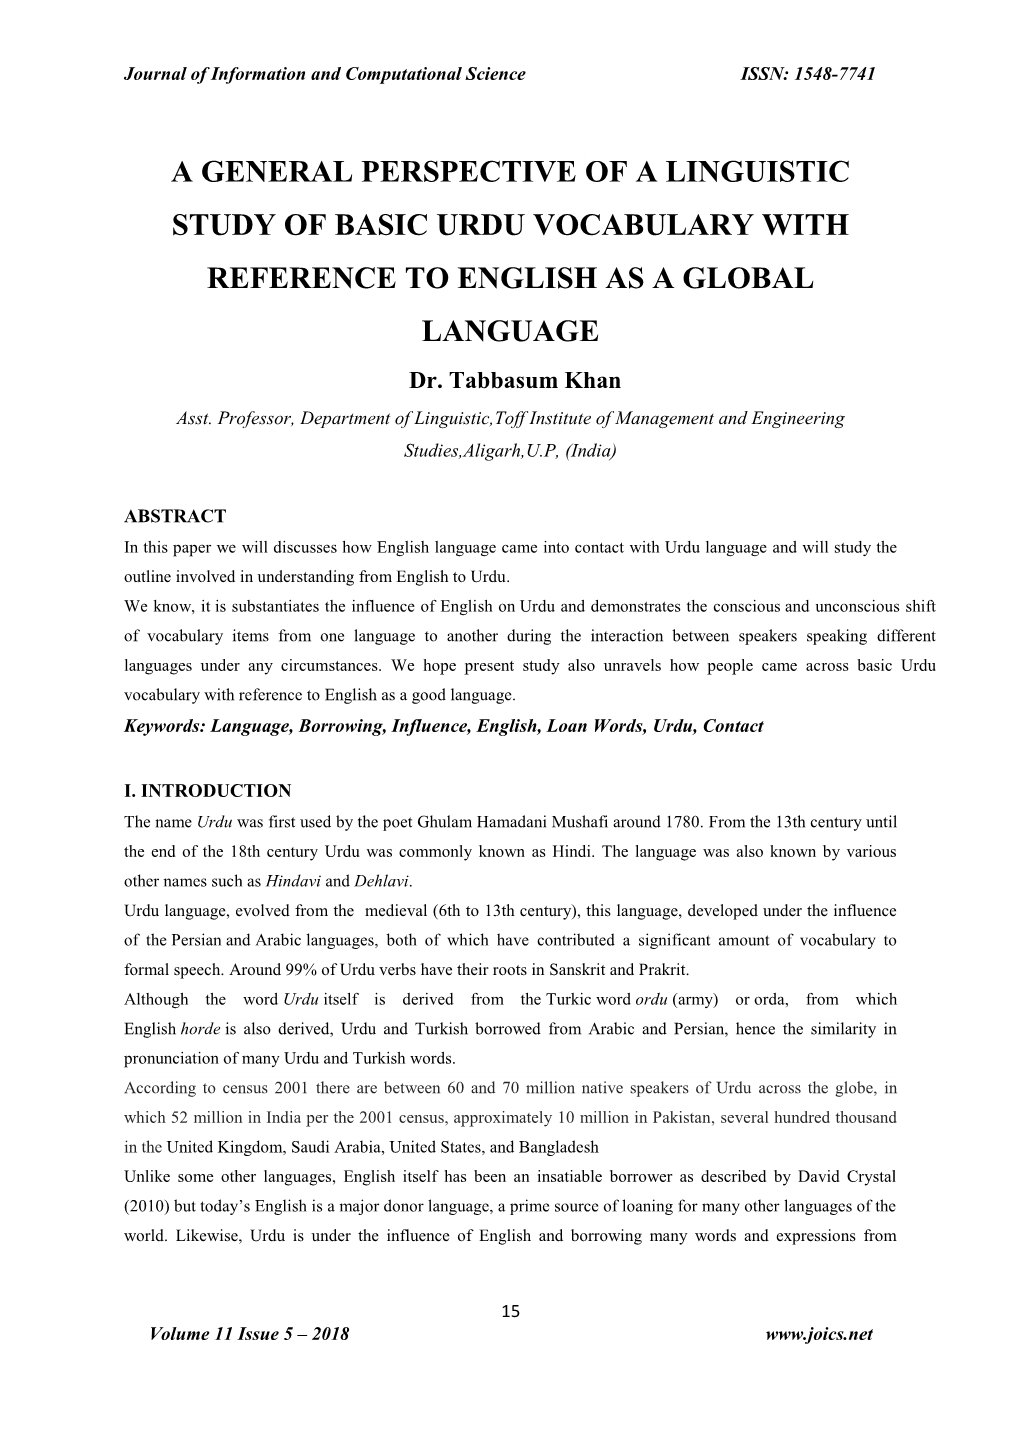 A GENERAL PERSPECTIVE of a LINGUISTIC STUDY of BASIC URDU VOCABULARY with REFERENCE to ENGLISH AS a GLOBAL LANGUAGE Dr